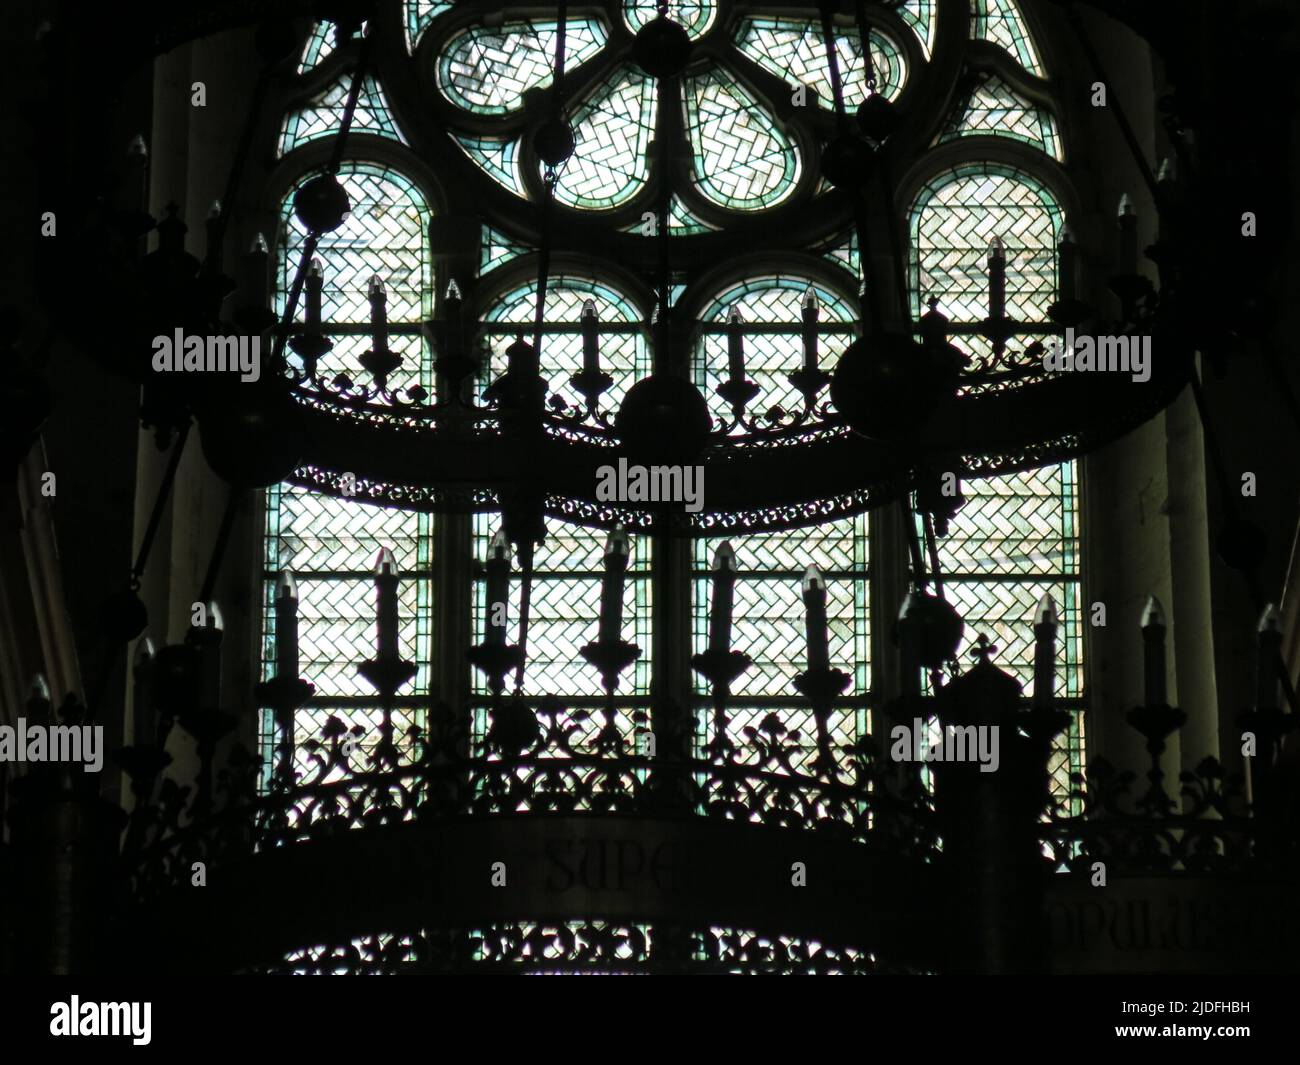 Abstract, black & white close-up of the ornate candelabra silhouetted against the stained glass windows of the Cathedral Saint Vincent in Viviers. Stock Photo